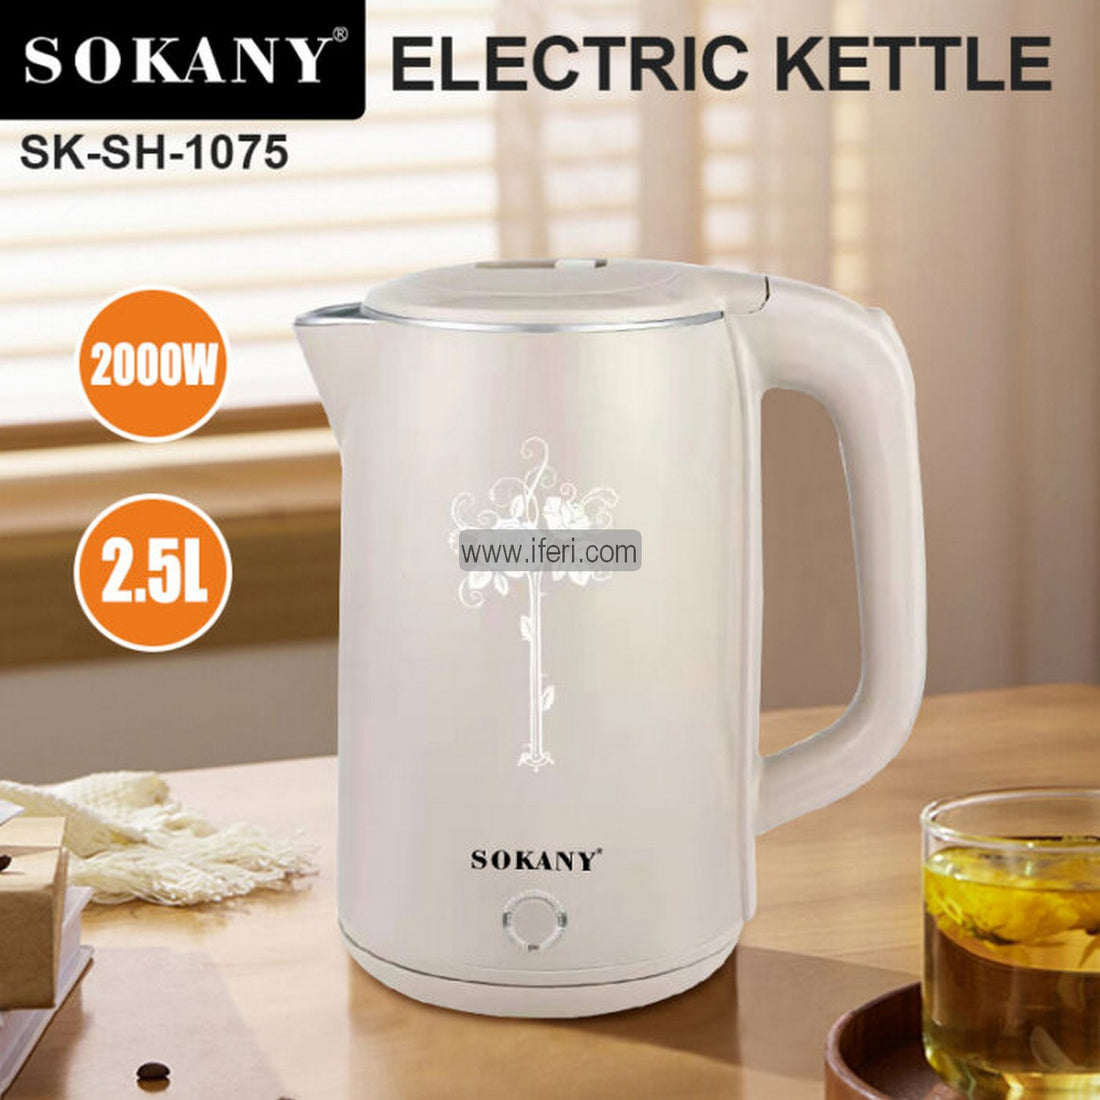 Buy Electric Kettle through online from iferi.com in Bangladesh